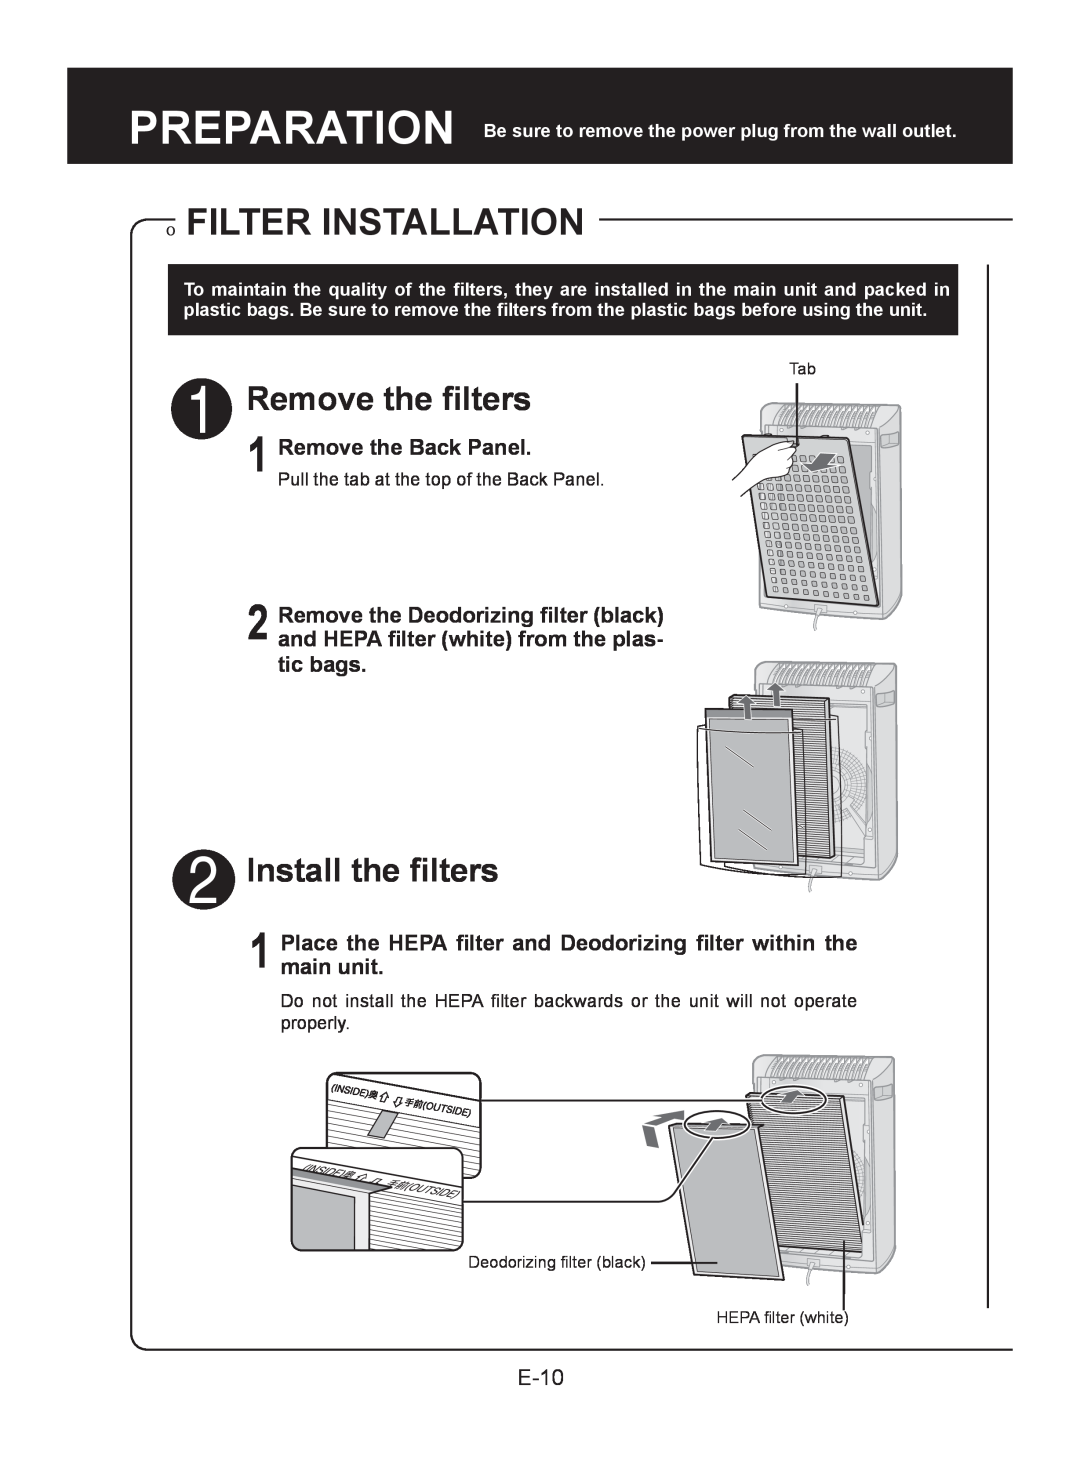 Sharp FP-A40UW, FP-A40C operation manual onFILTER INSTALLATION, Remove the filters, Install the filters 